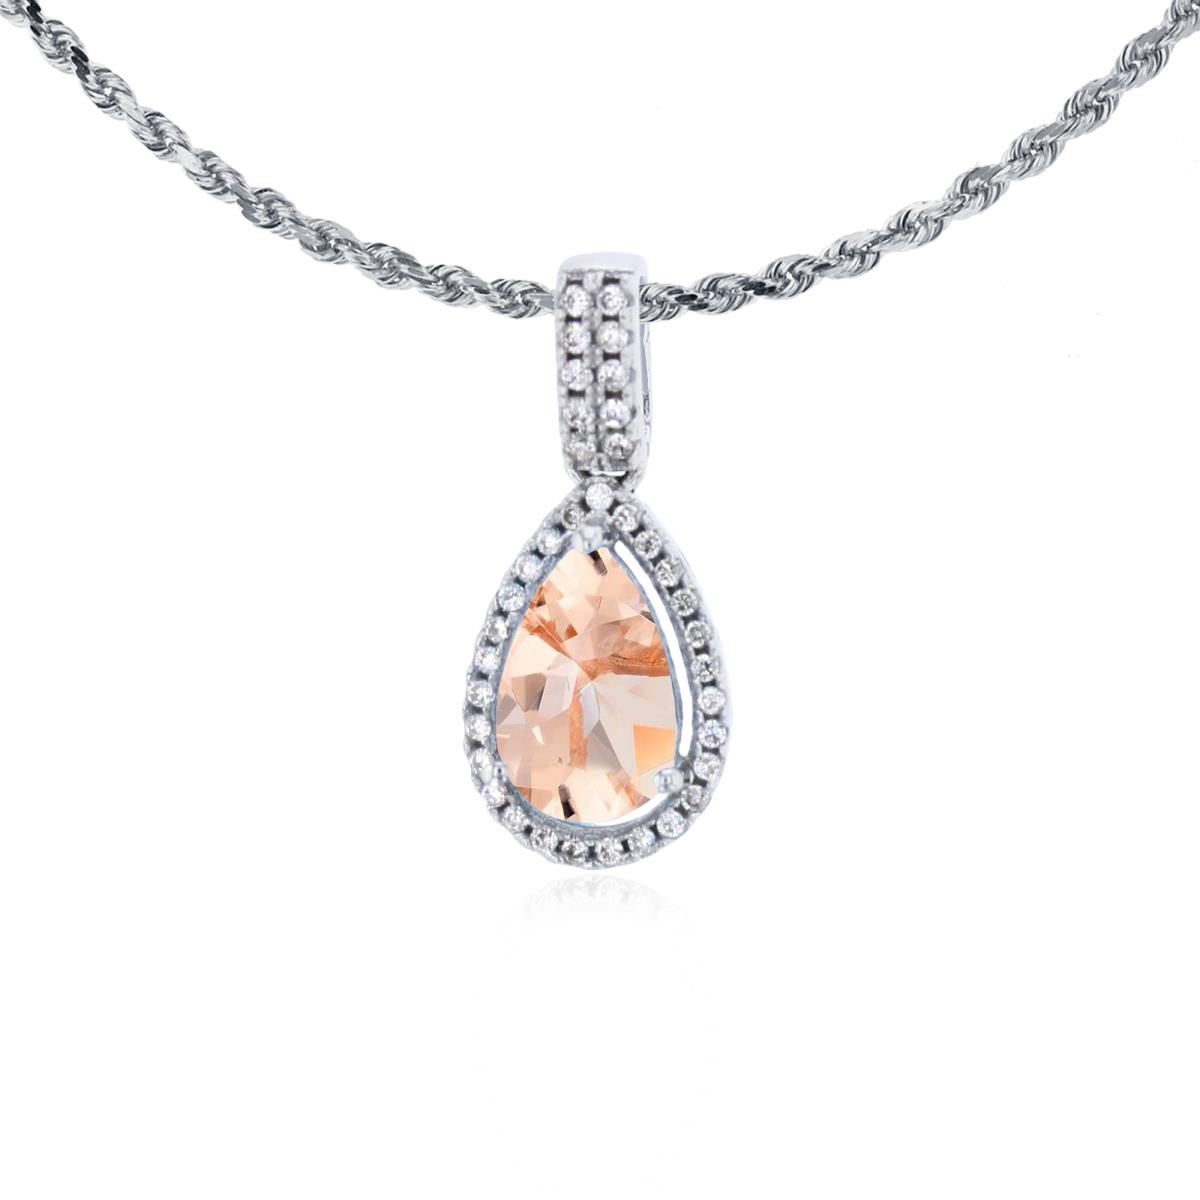 14K White Gold 8x5mm Pear Cut Morganite & 0.11 CTTW Diamond Halo 18" Rope Chain Necklace